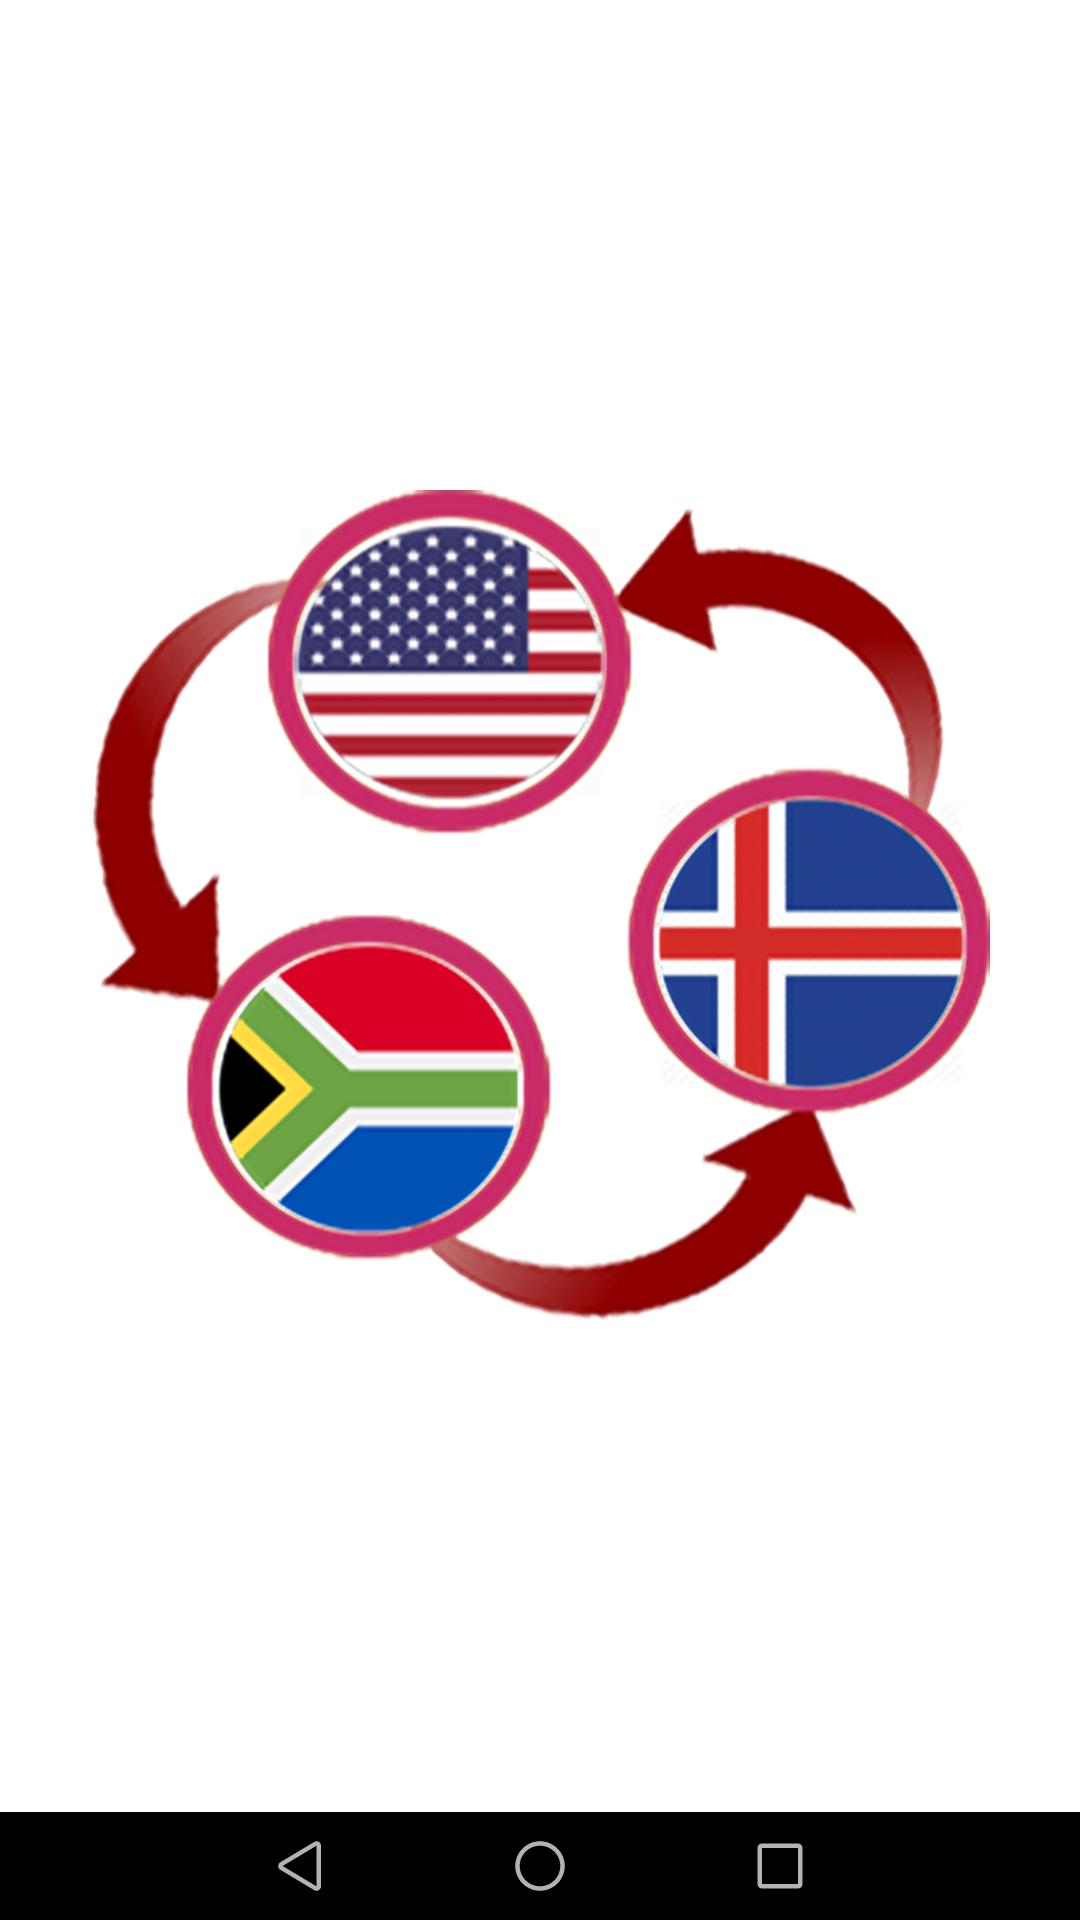 US Dollar To South African Rand and ISK Converter for Android - APK Download